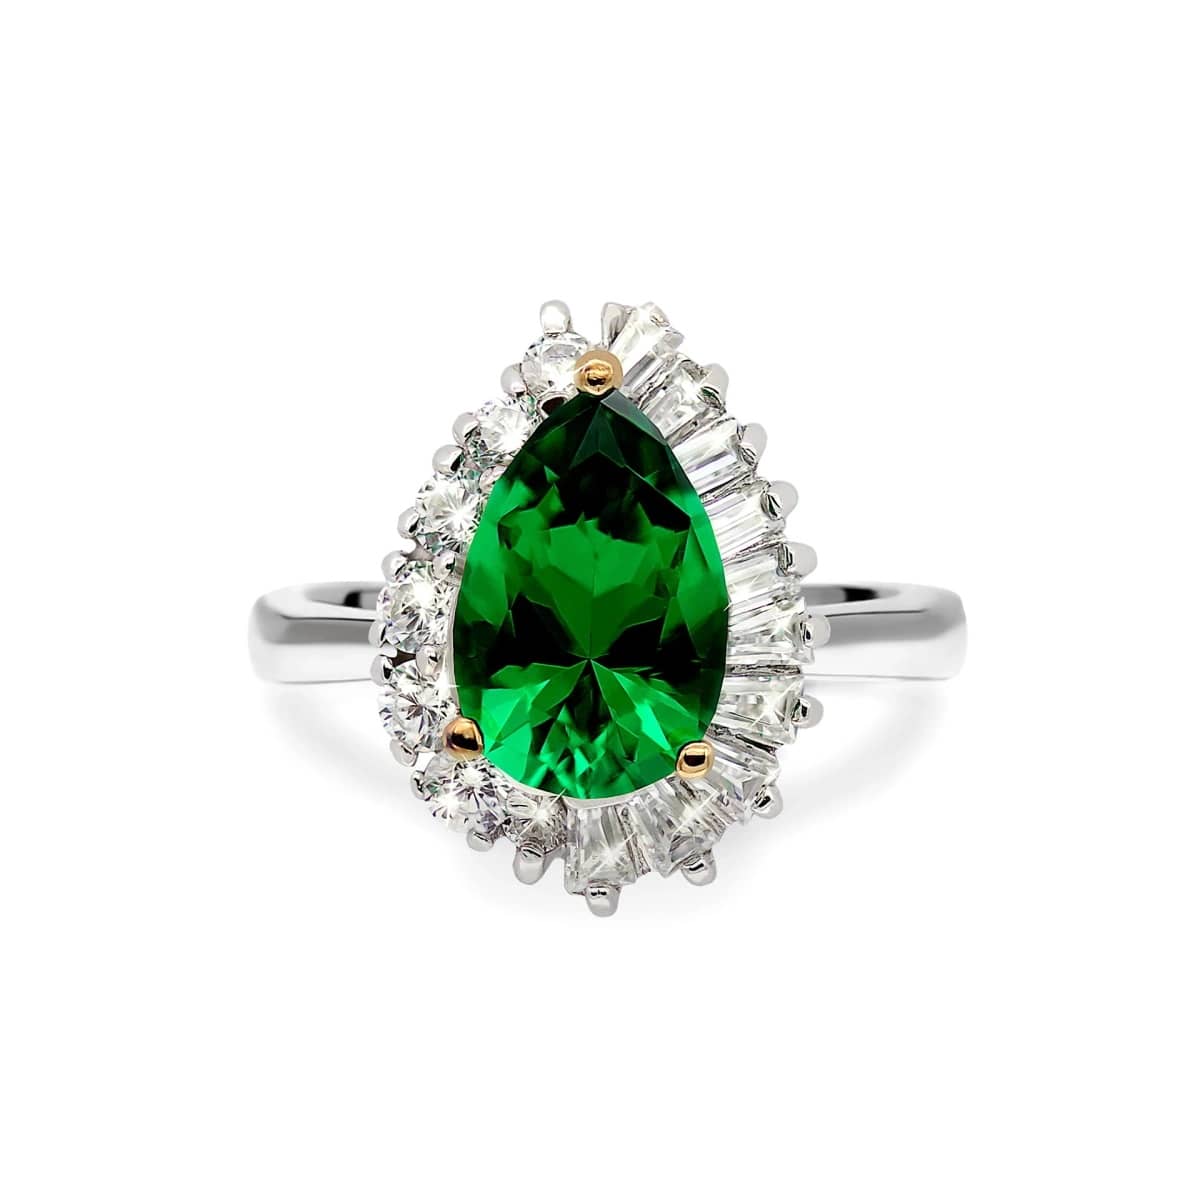 CARAT* London Eleanor ring is made in sterling silver with white gold plating. The emerald green coloured centre stone is the equivalent of 3 carats and cut in a pear shape. Encapsulated by round and emerald cut white stones. An elegant ring which is sure to dazzle.